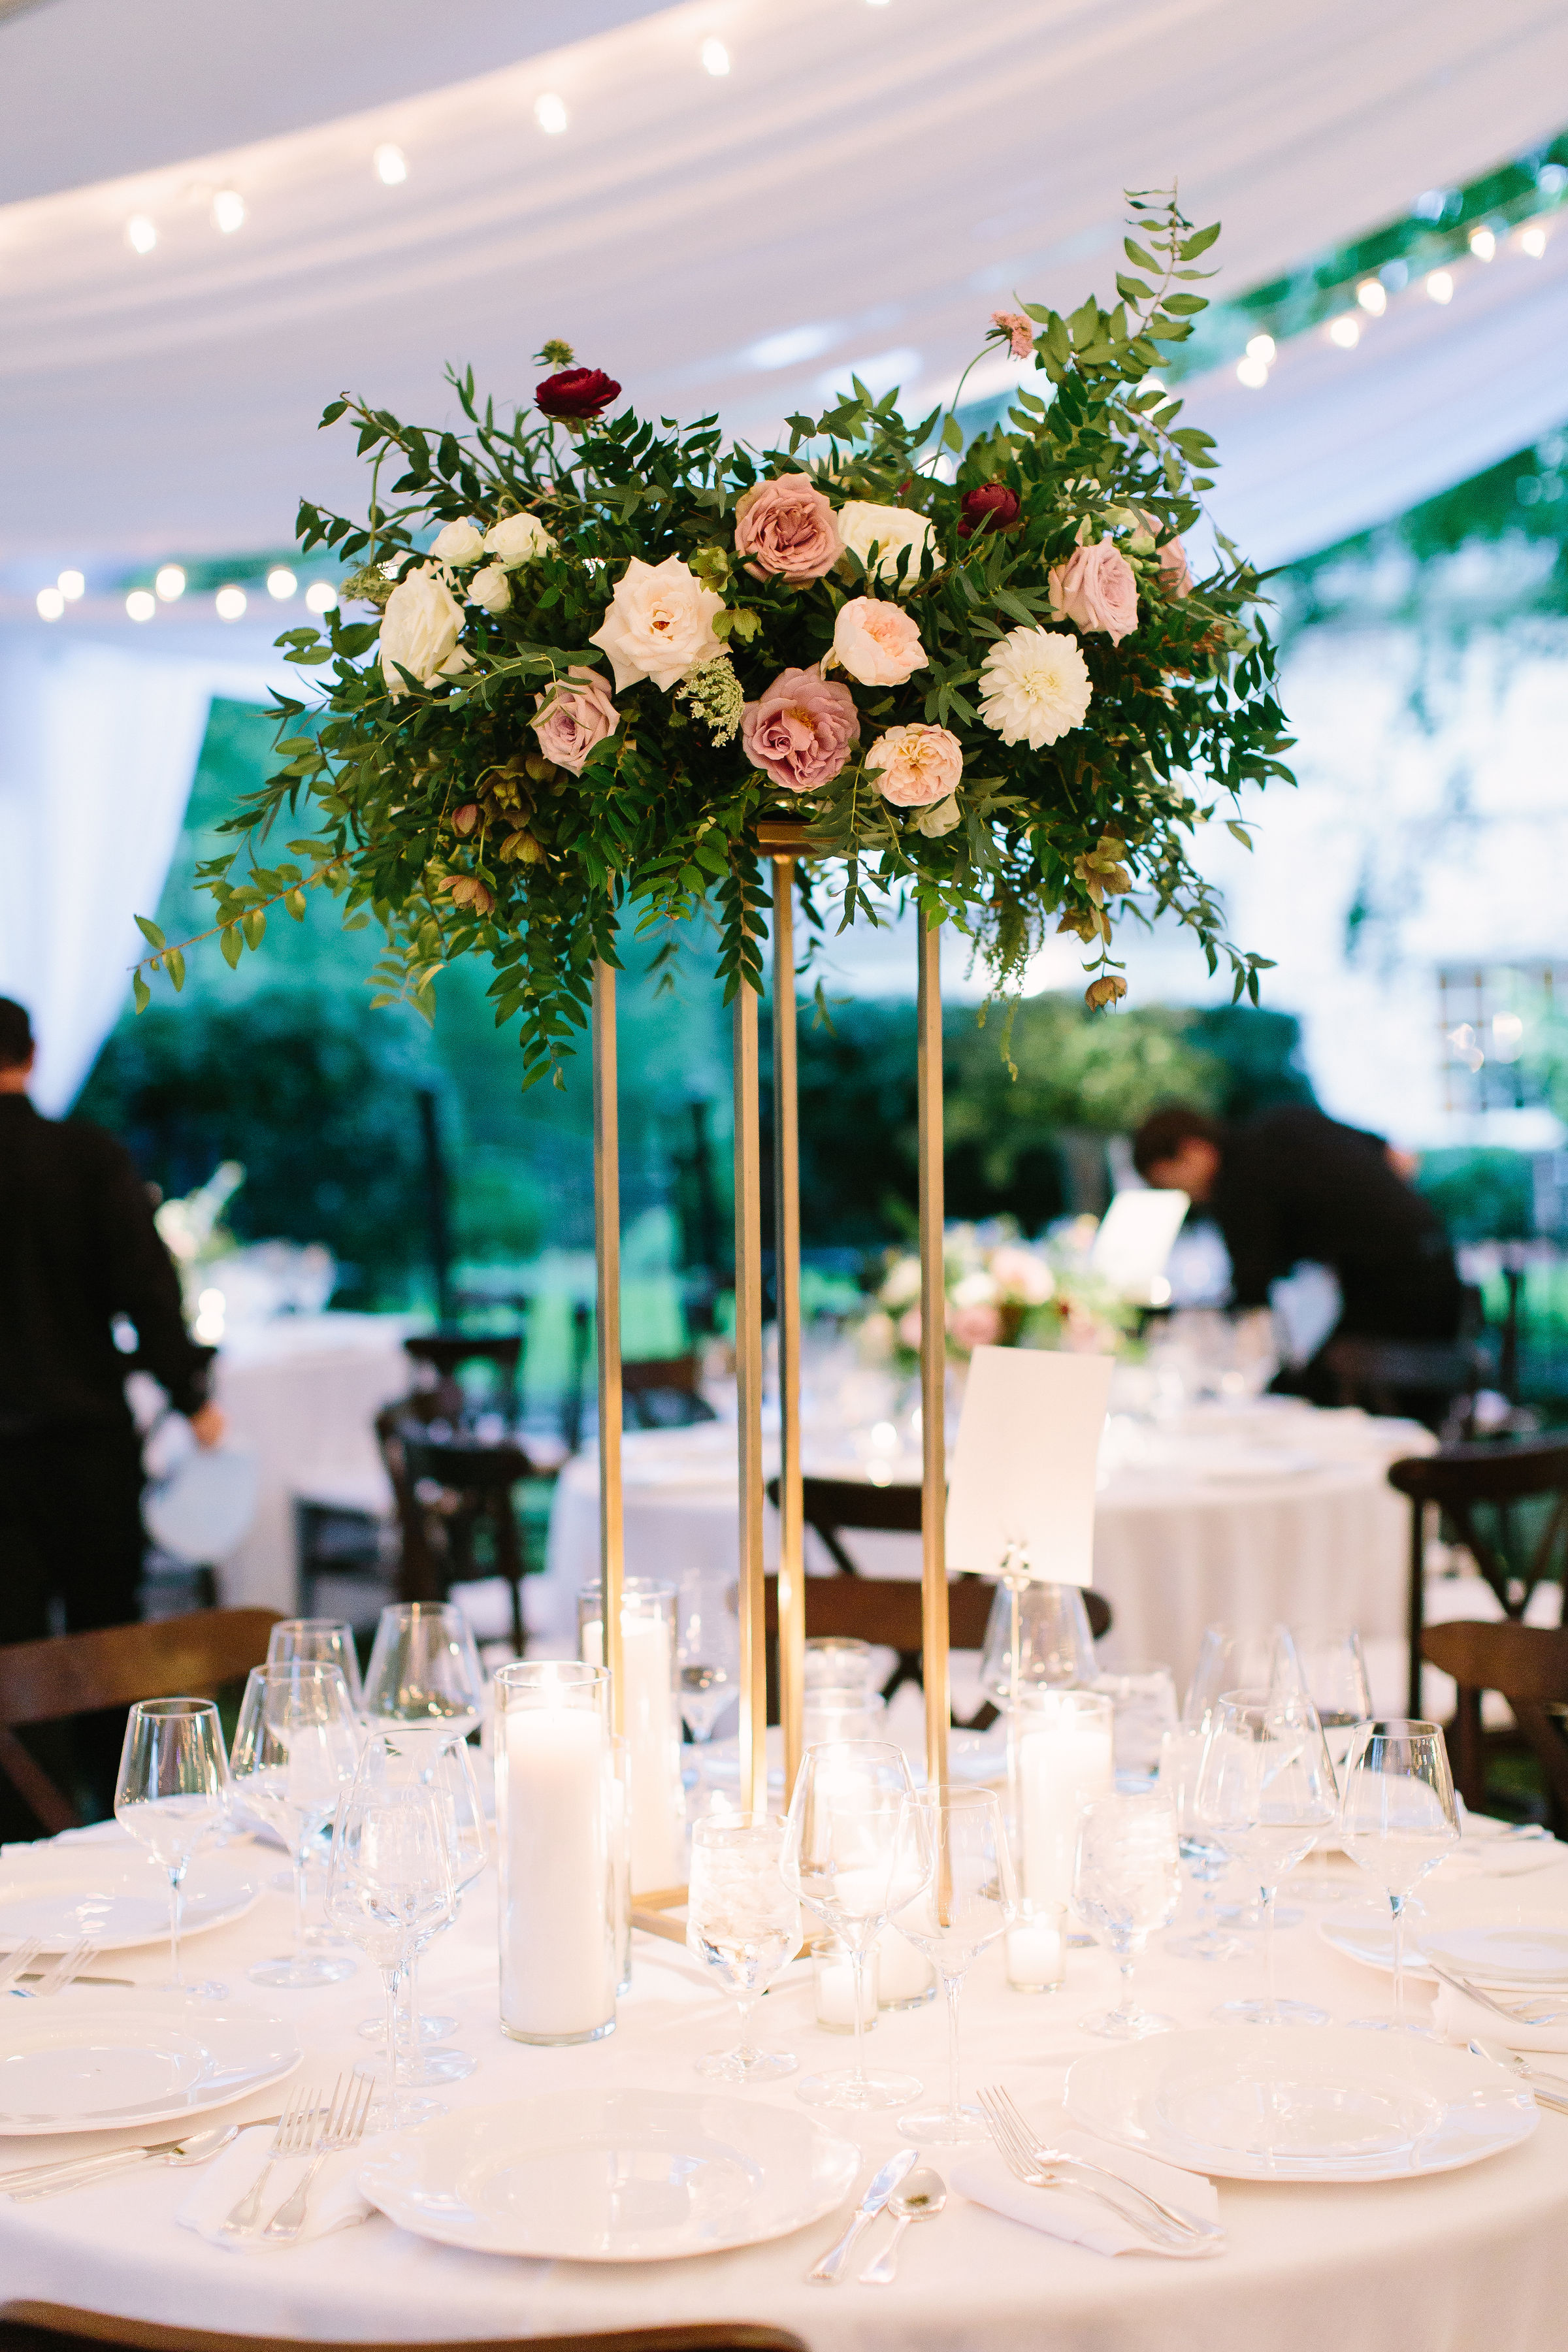 Slender gold stand overflowing with an elevated arrangement of lush, trailing greenery, garden roses and ranunculus in hues of mauve, blush, and ivory // Nashville Wedding Flowers